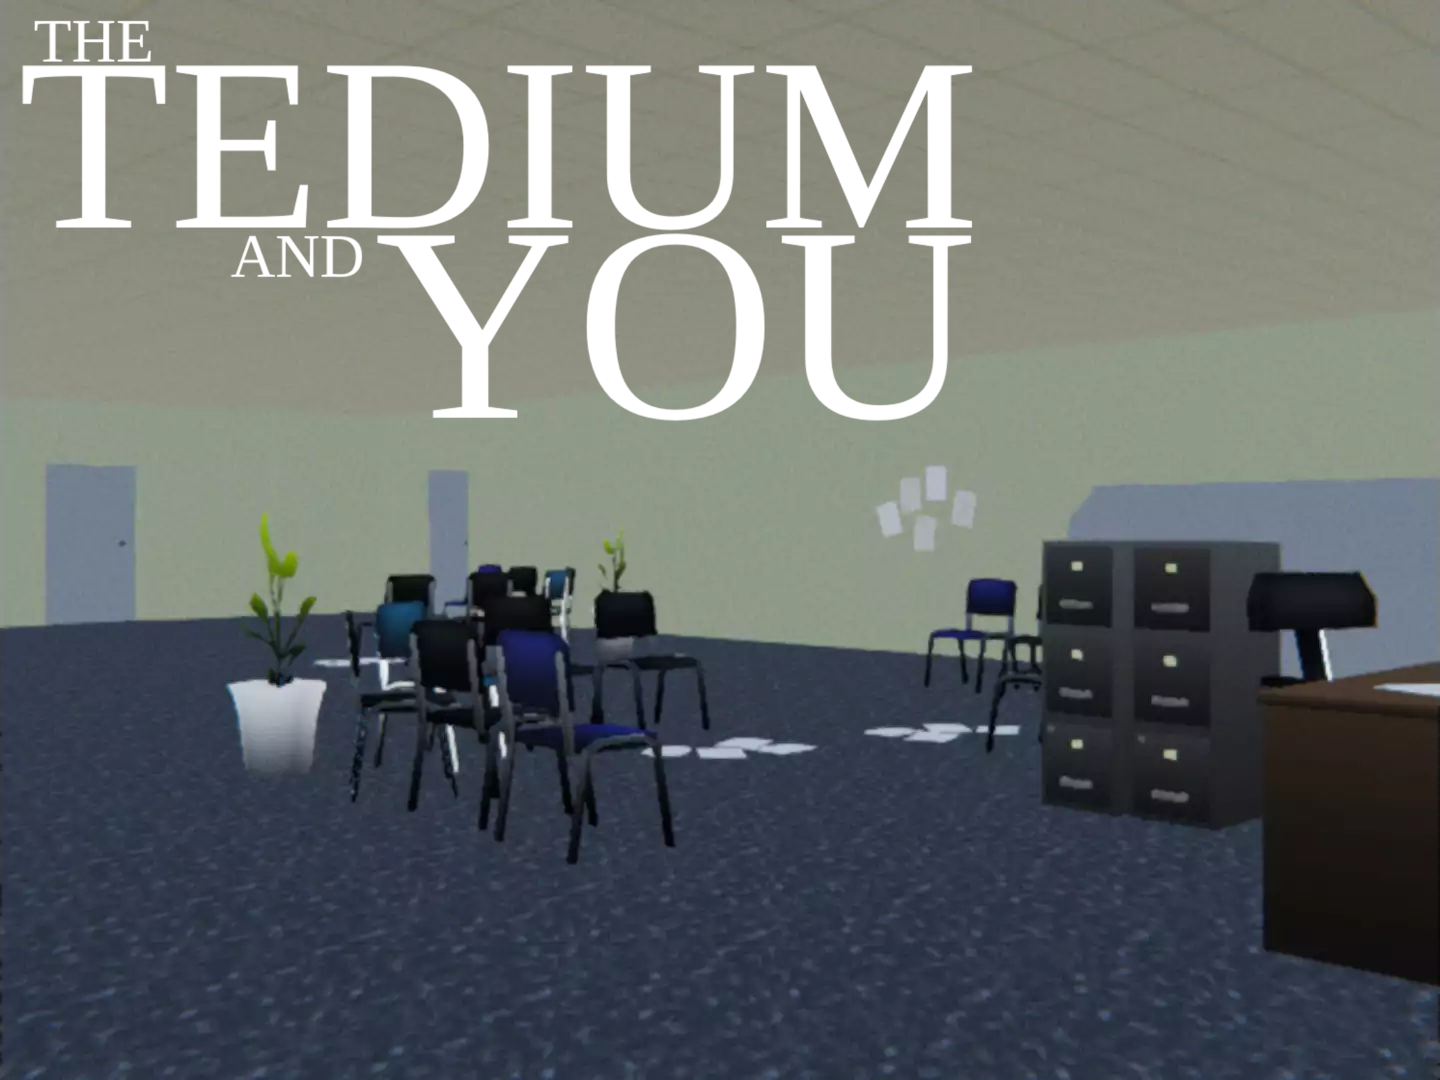 A  promotional image for The Tedium and You